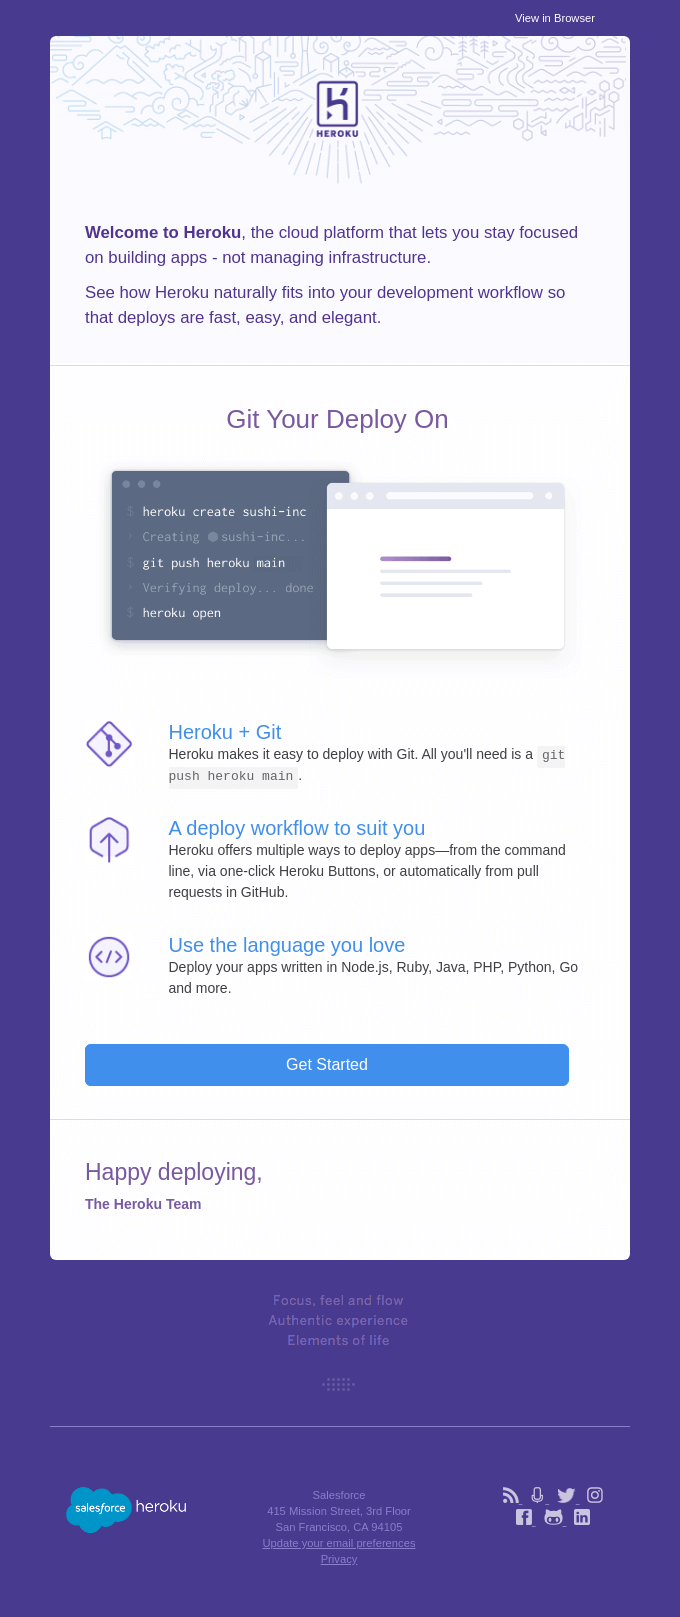 An example of onboarding email to teach your audience about the value of a product